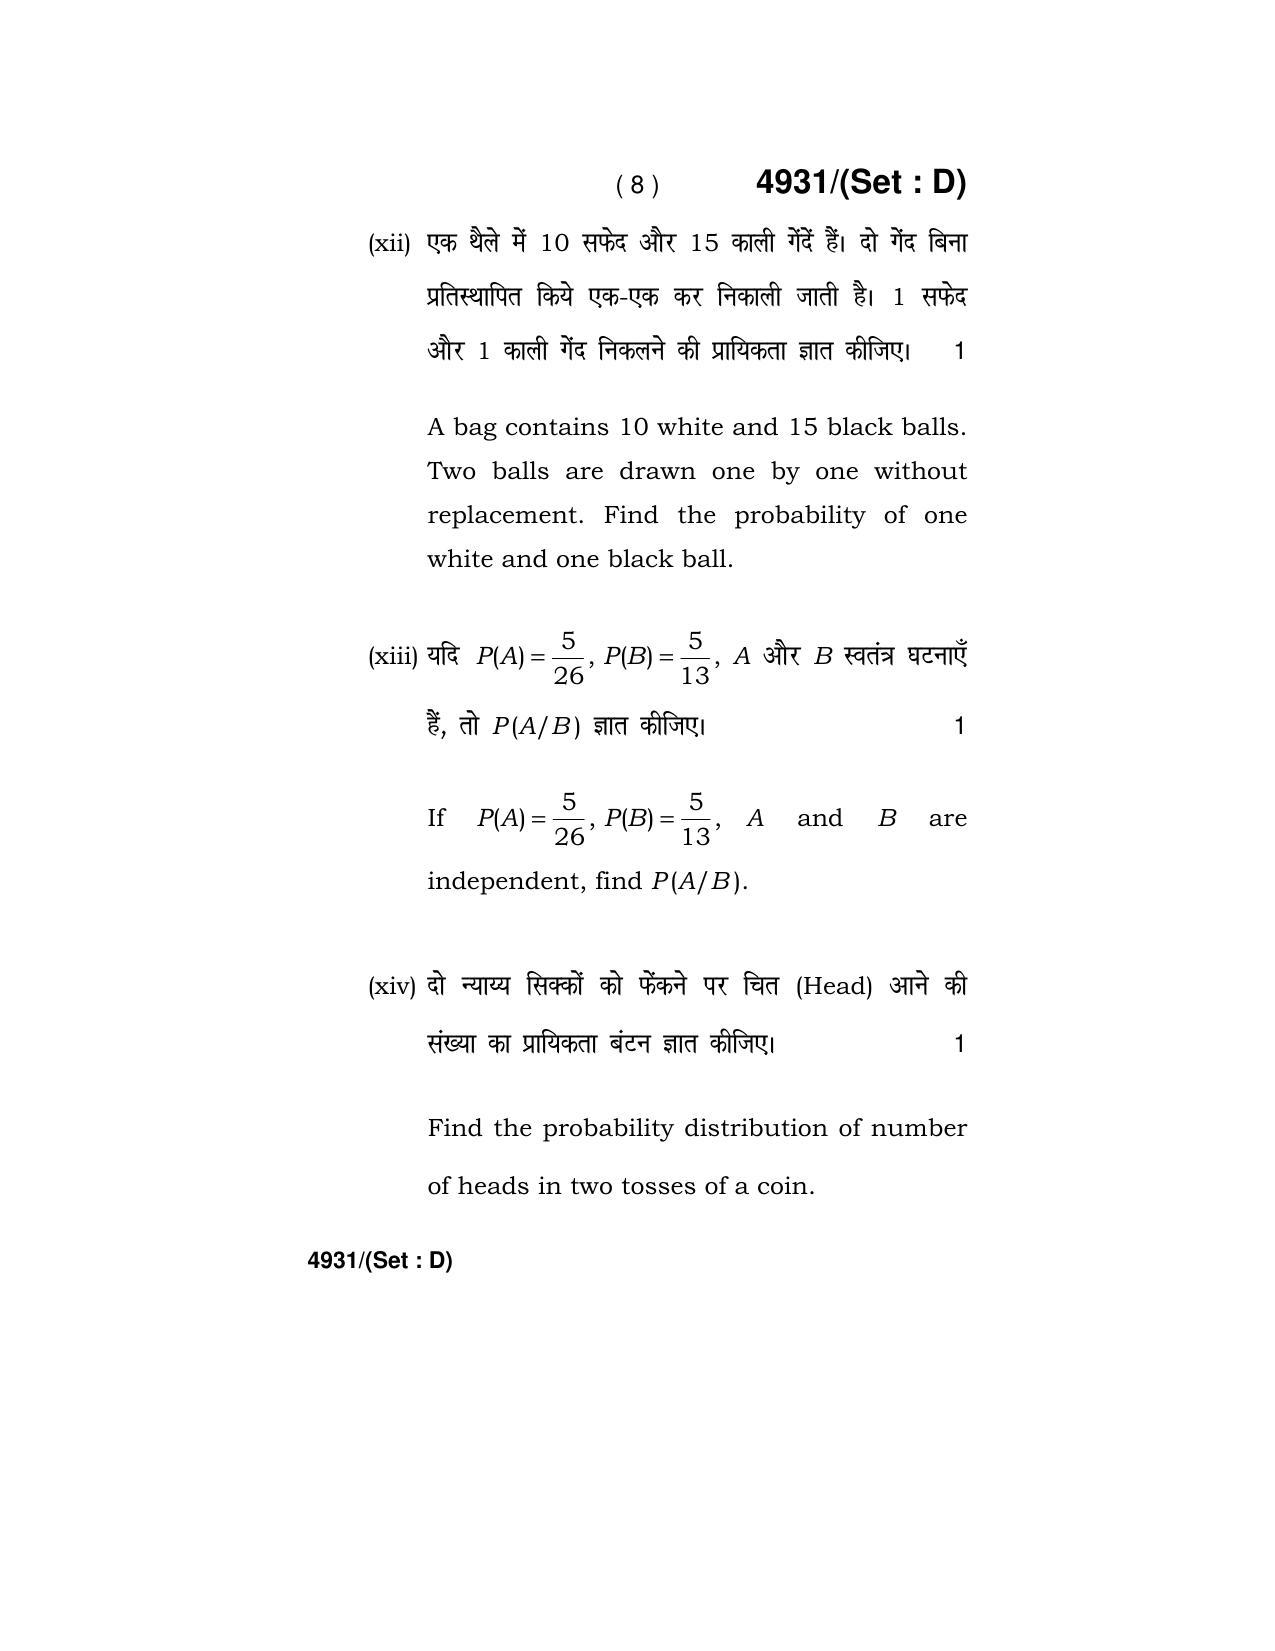 Haryana Board HBSE Class 12 Mathematics 2020 Question Paper - Page 56